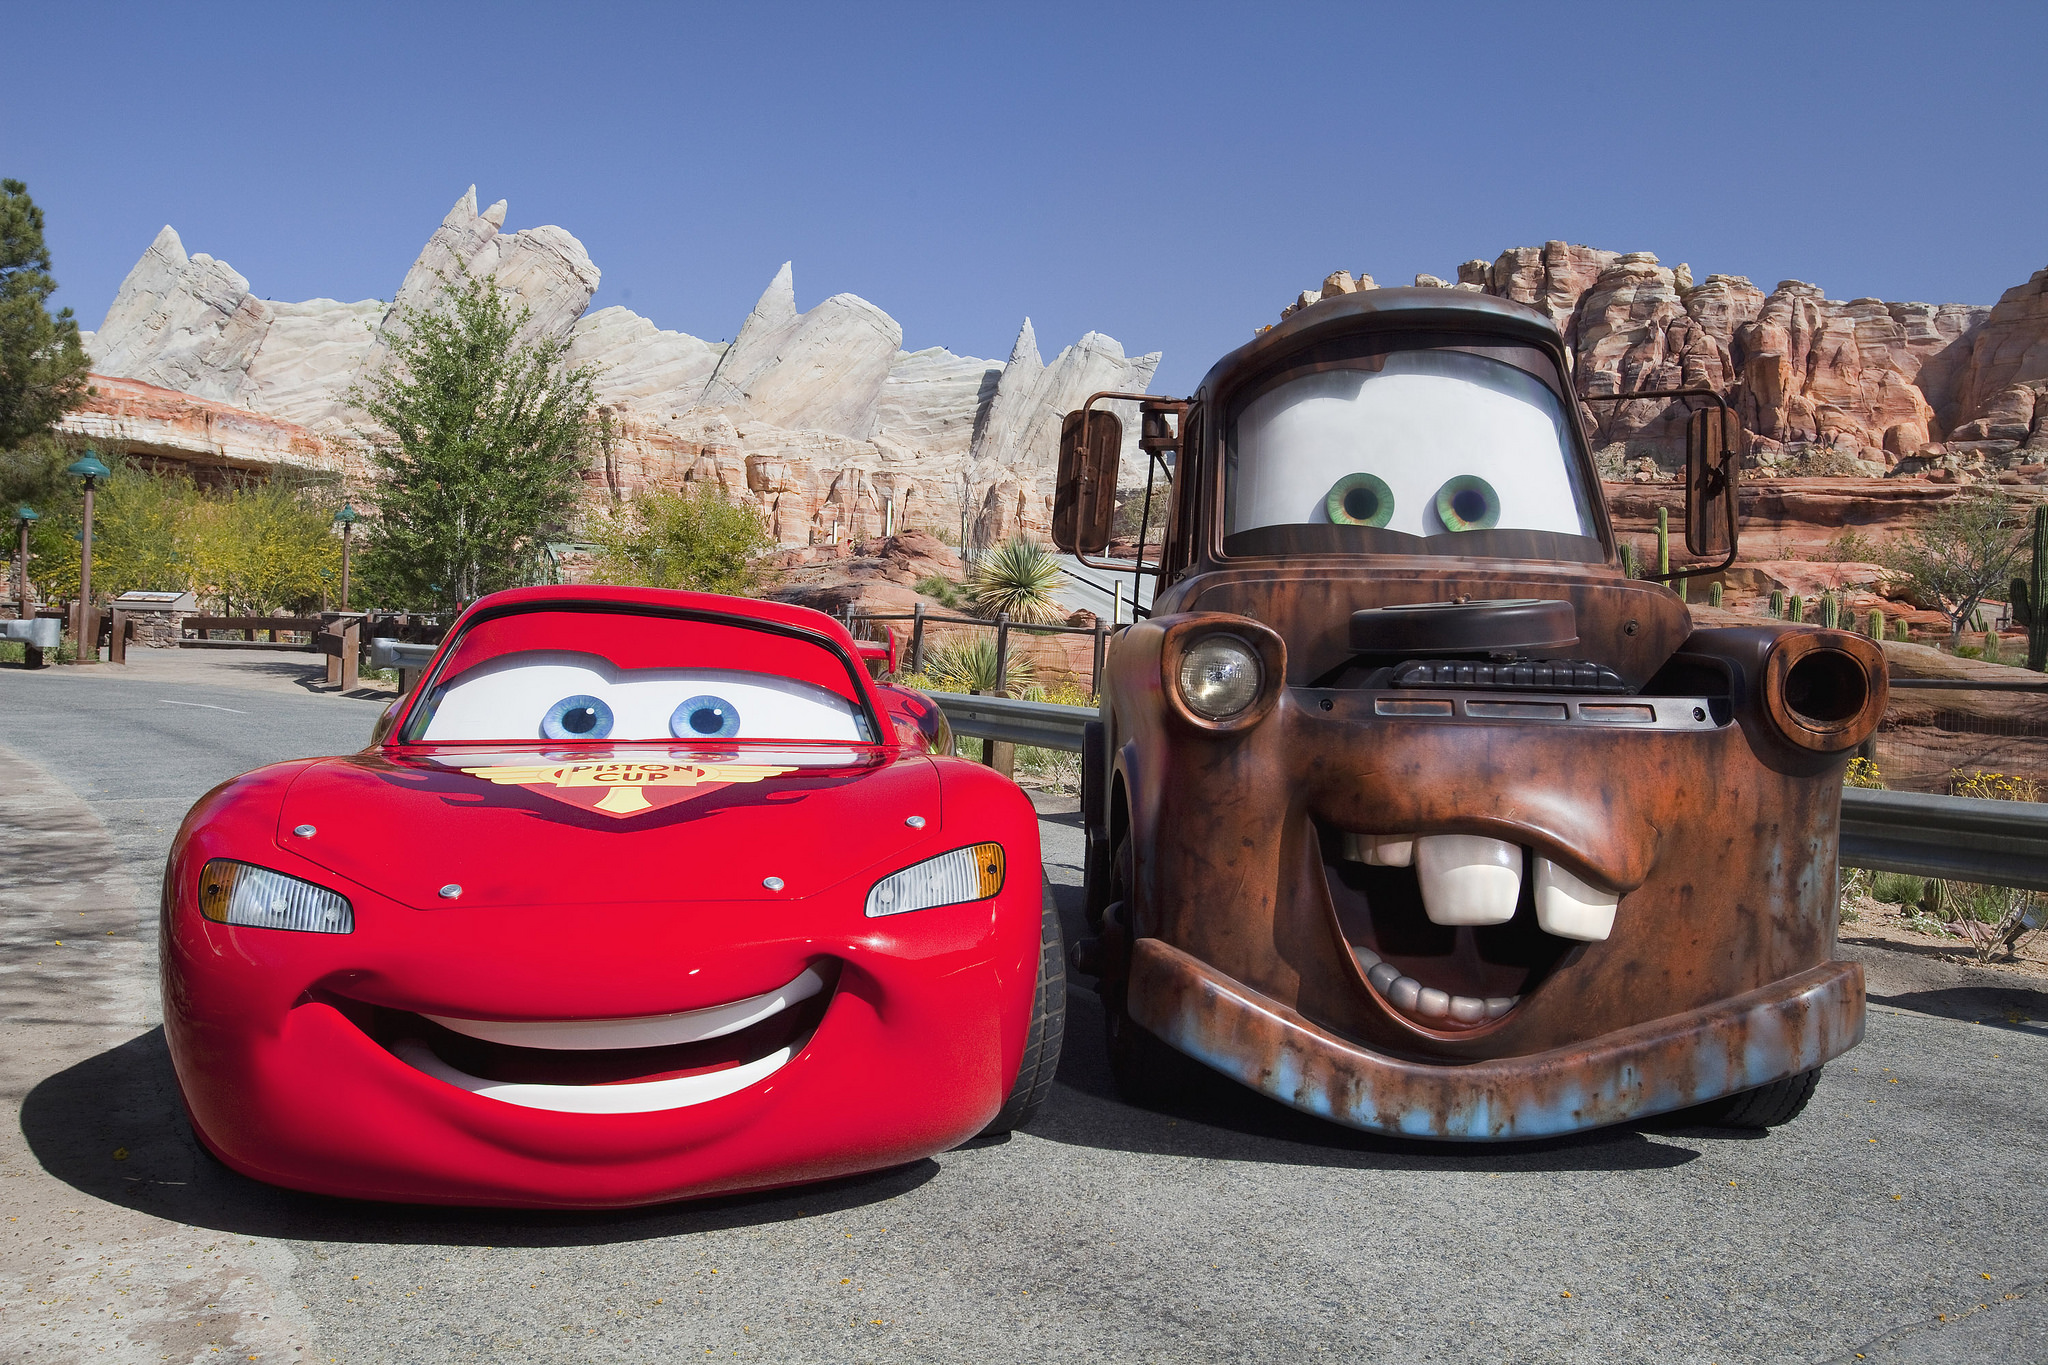 Some of the Most Anticipated Sequels are Coming Soon, like Cars 3